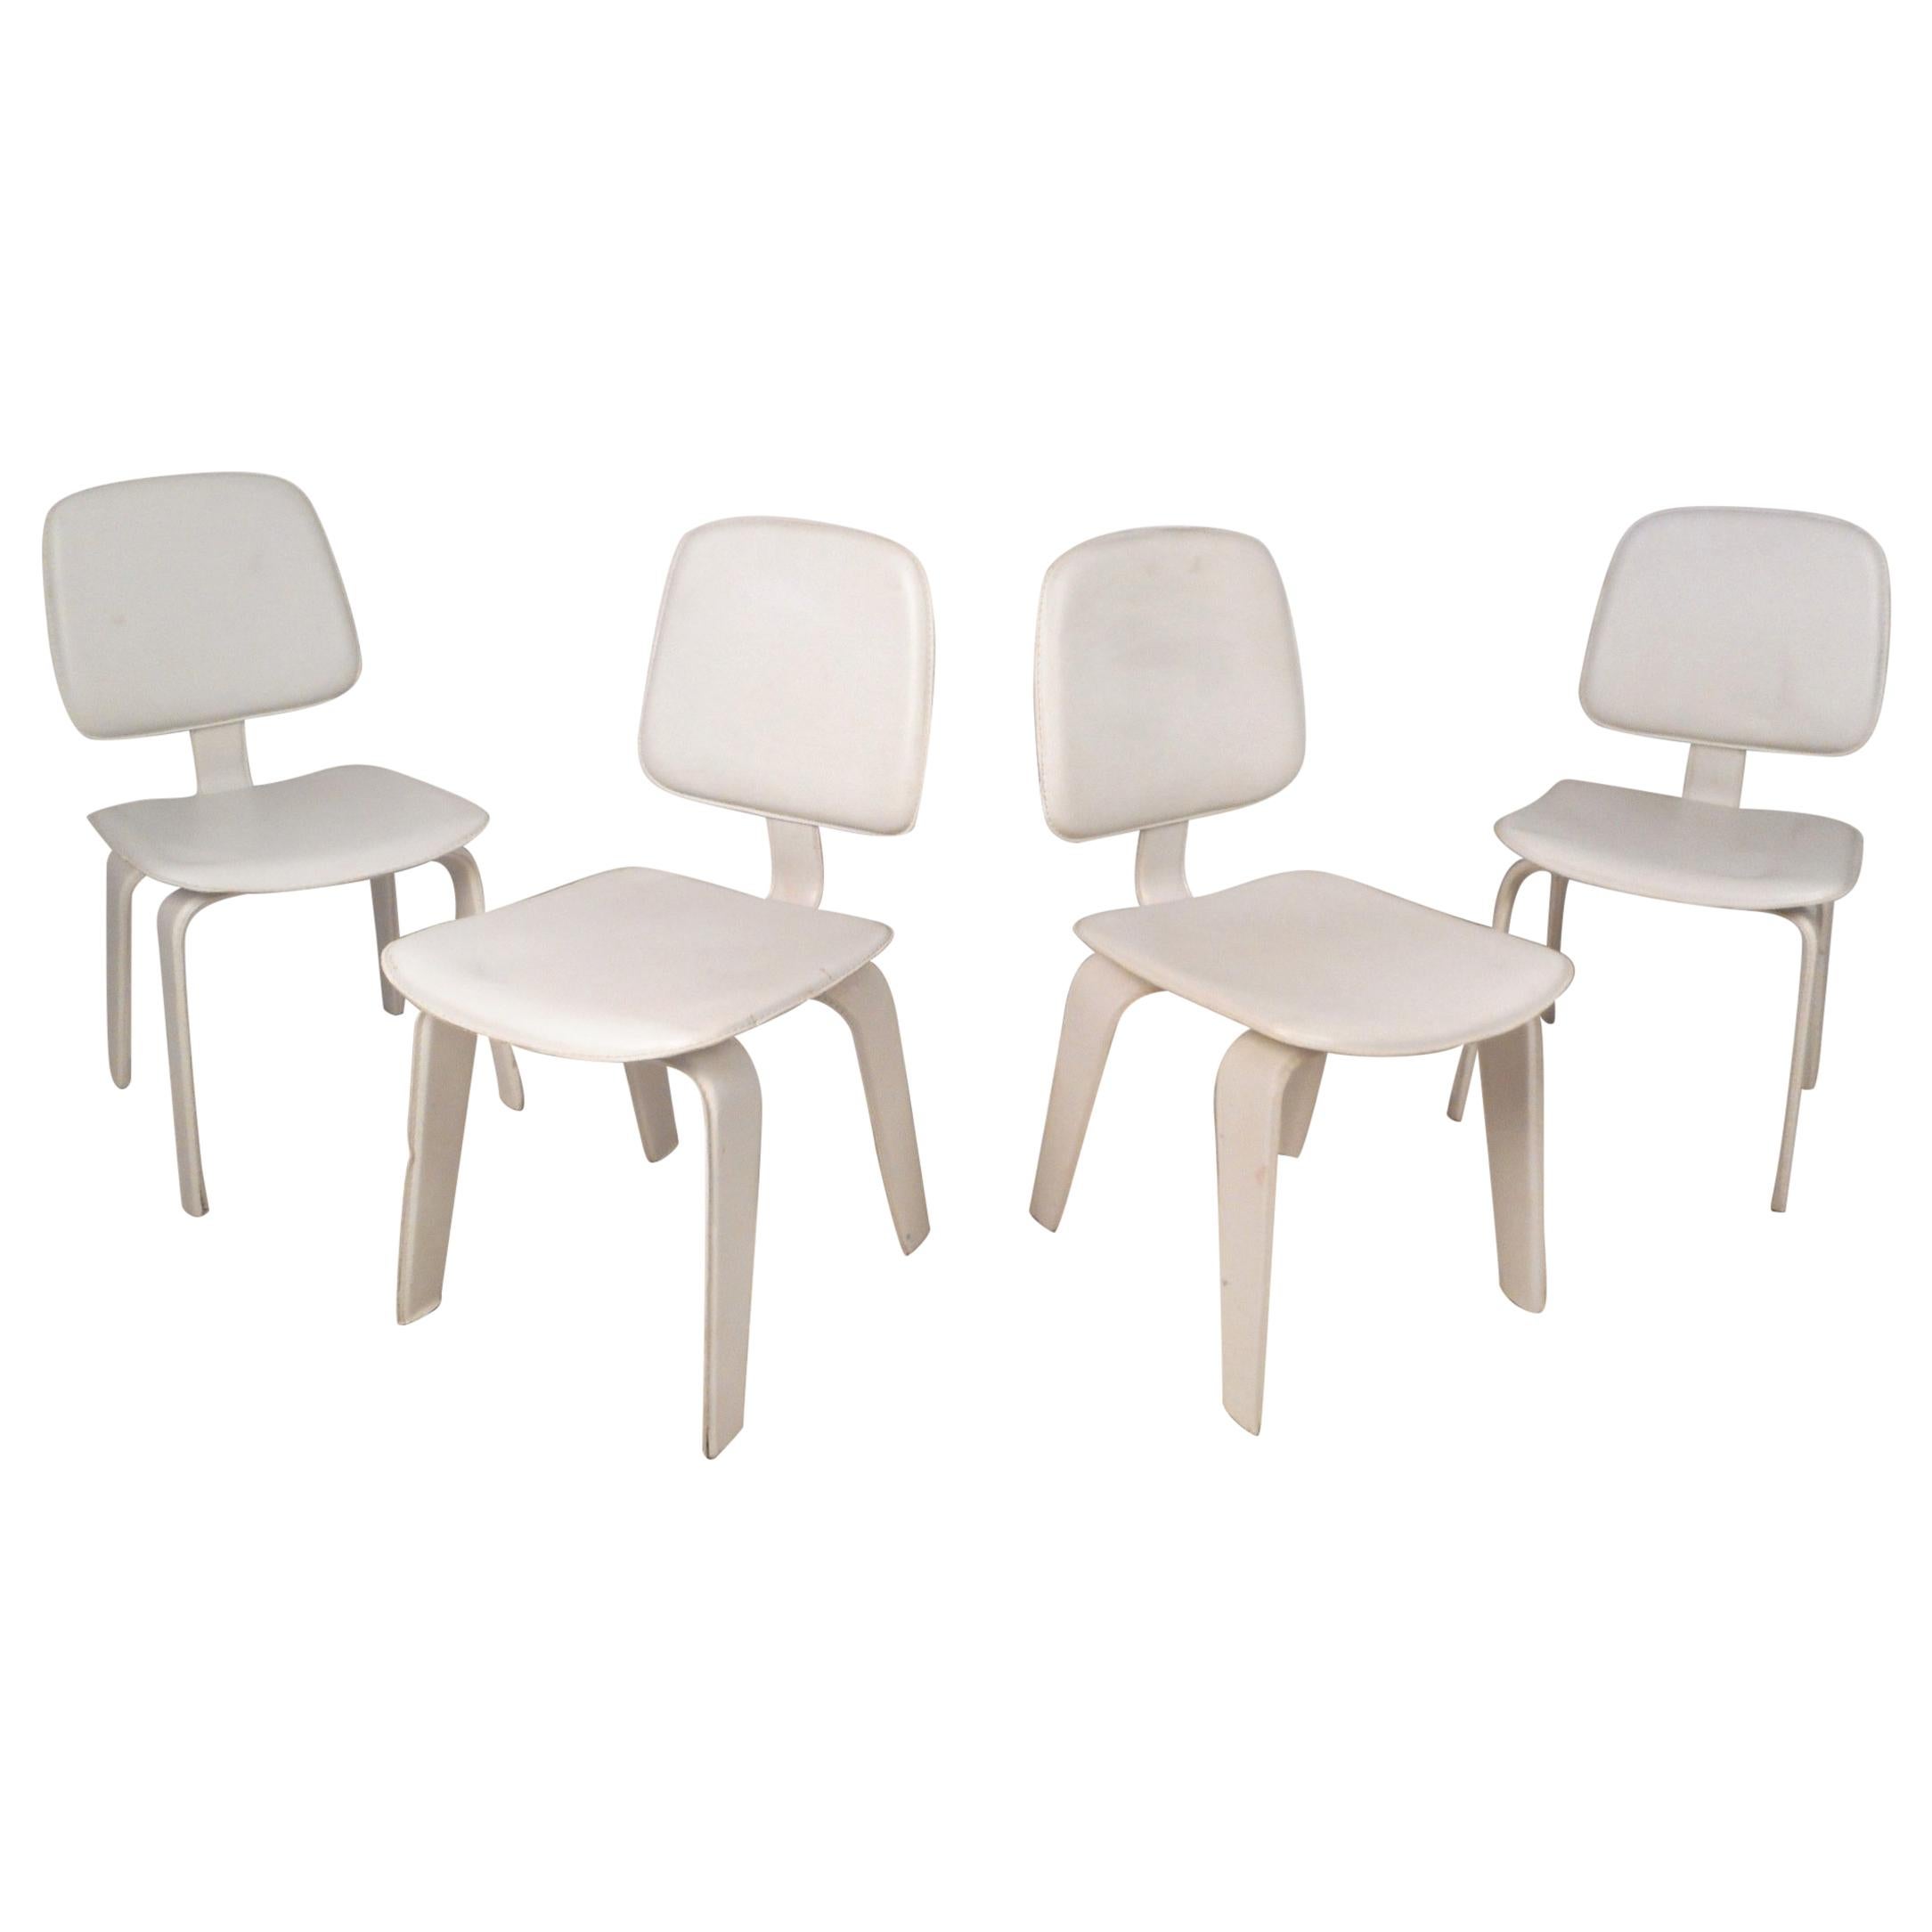 Set of Four Mid-Century Modern White Leather Dining Chairs